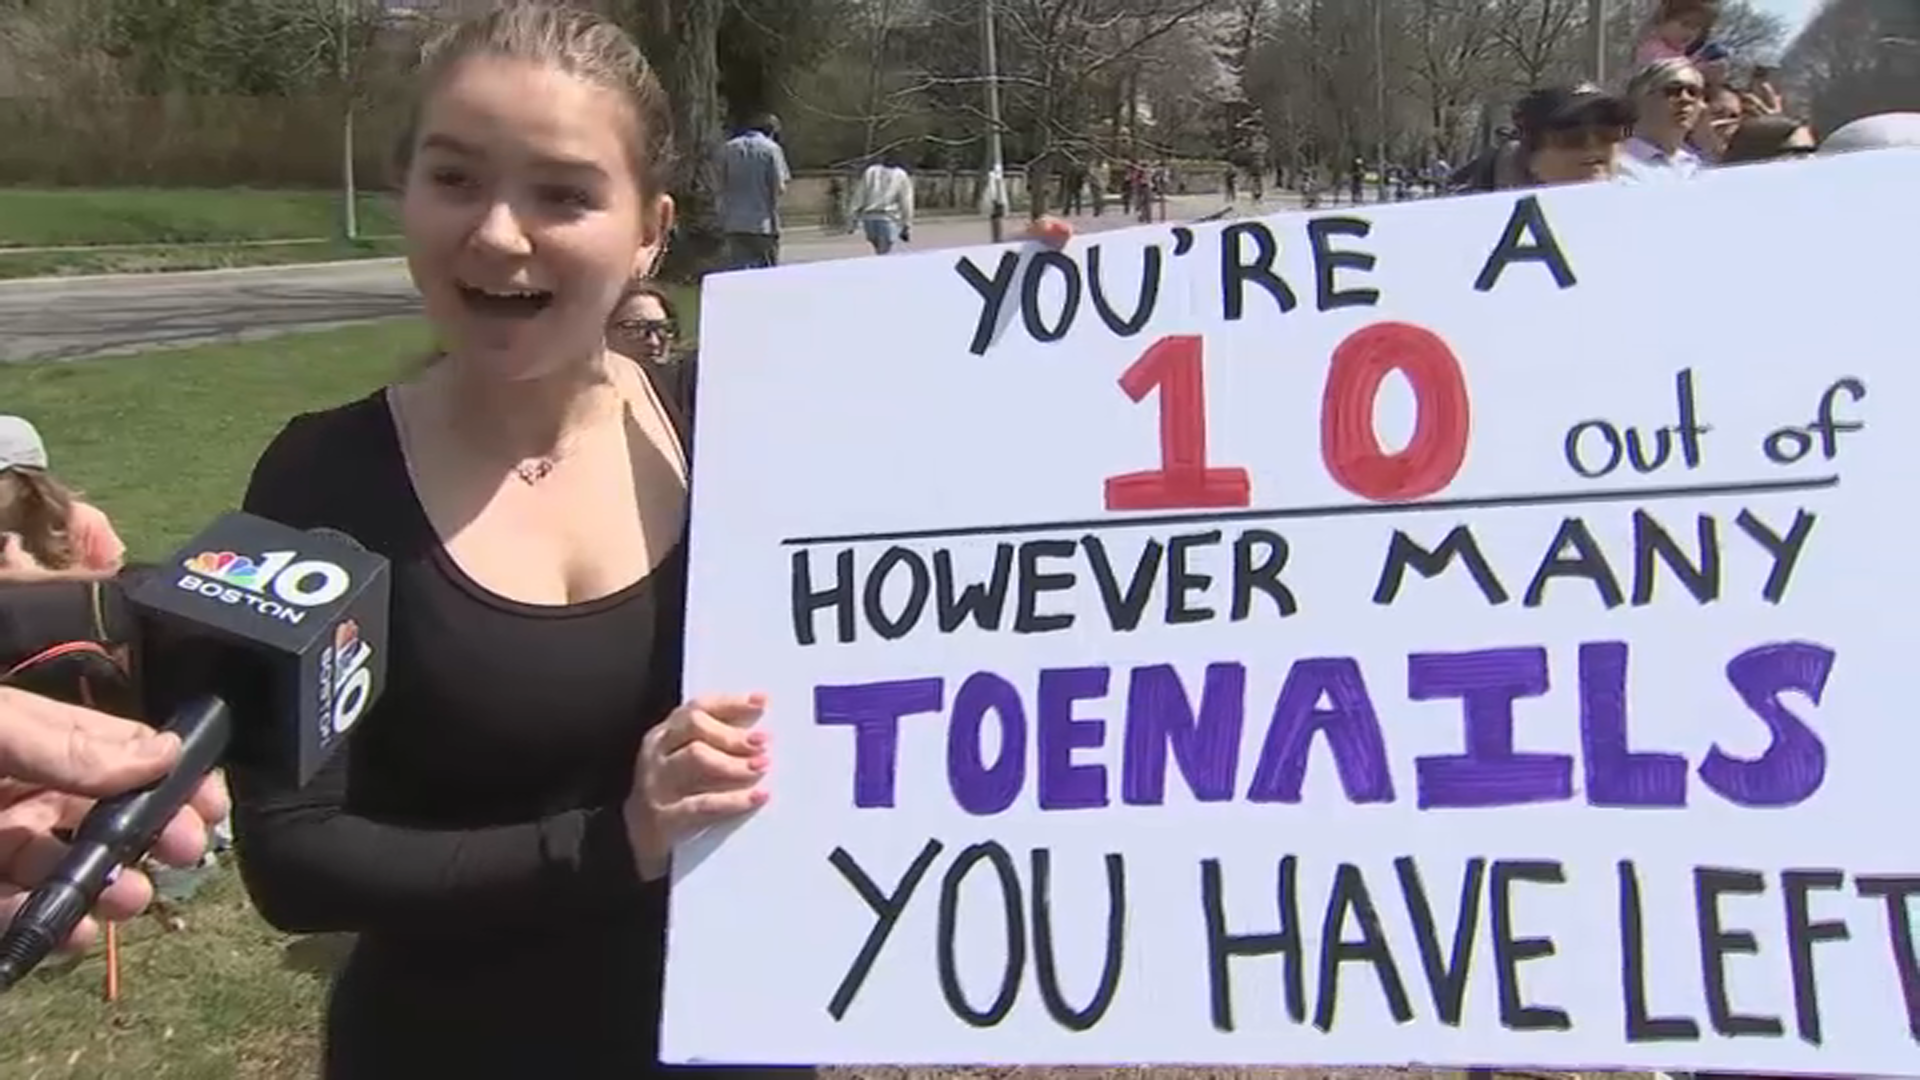 A Boston Marathon spectator at Heartbreak Hill in Newton, Massachusetts, holds a sign that reads, "You're a 10 out of however many toenails you have left."